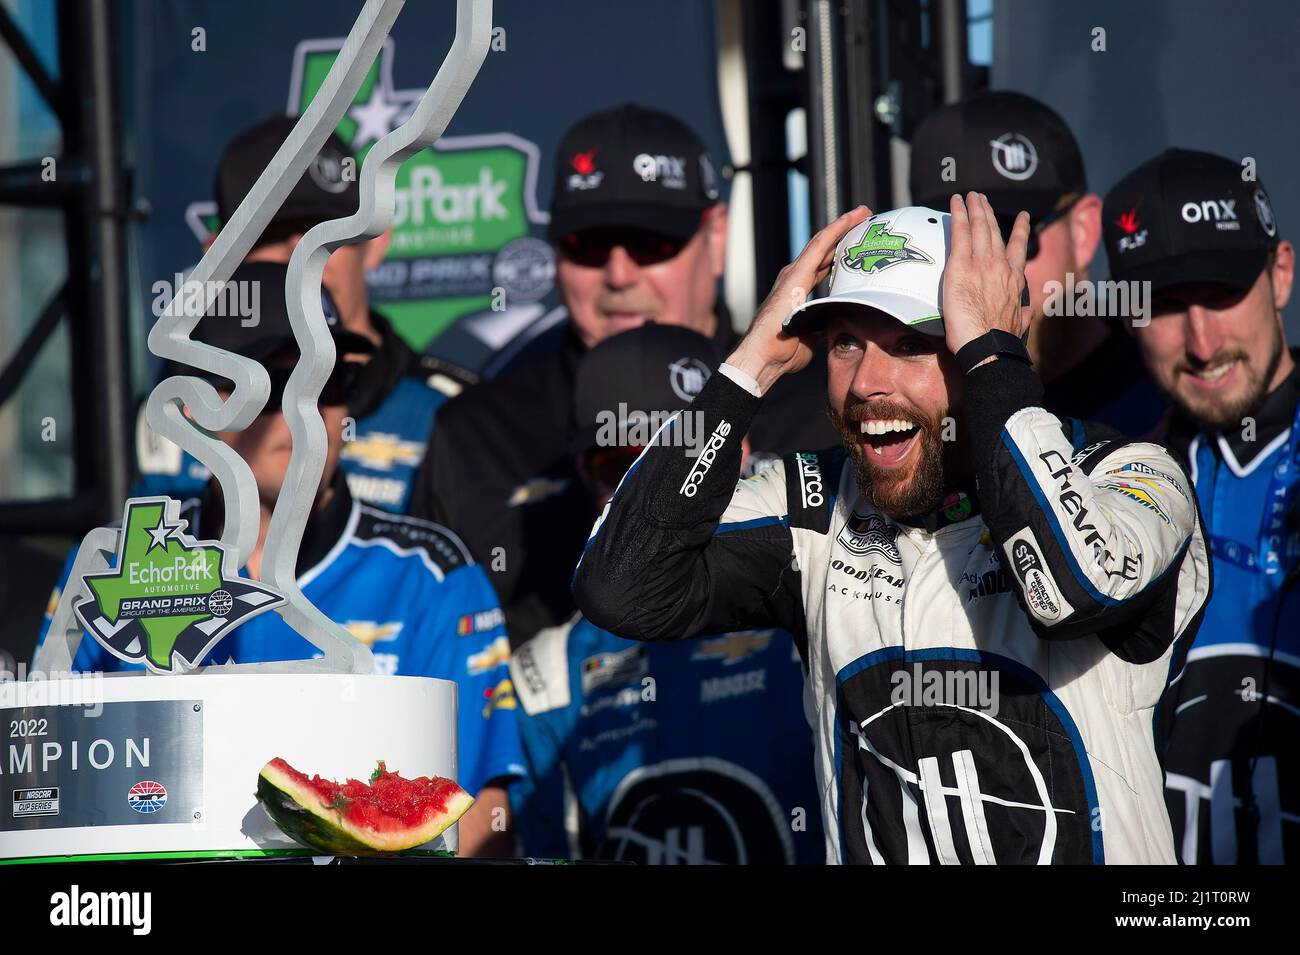 The Americas. 27th Mar, 2022. Ross Chastain (1) NASCAR Cup Series driver with TrackHouse Racing Chevrolet, celebrates the win at EchoPark Automotive Grand Prix, Circuit of The Americas